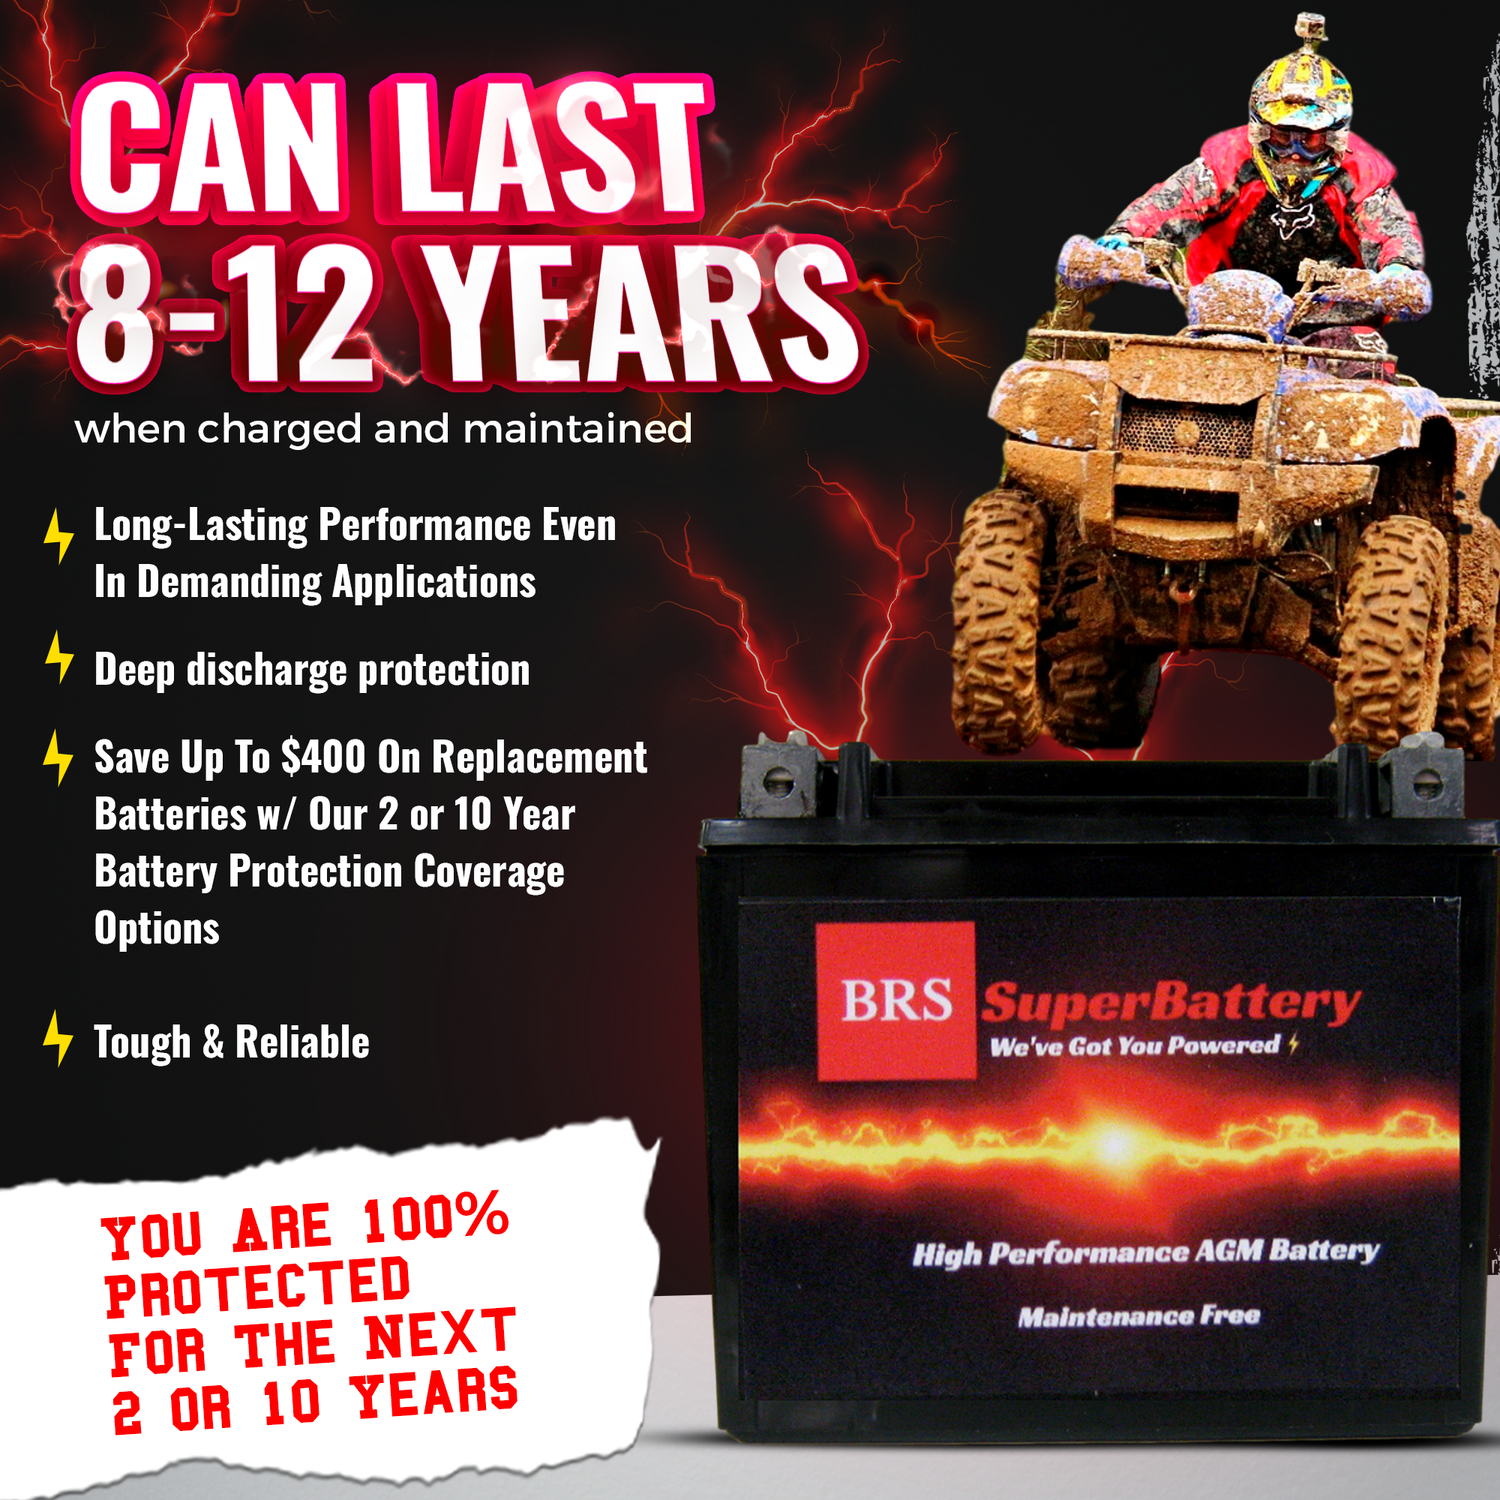 High Performance BRS20CH-BS 2 Year Battery & Smart Charger / Maintainer Combo Bundle Kit 12v Sealed AGM PowerSports Battery - BRS Super Battery